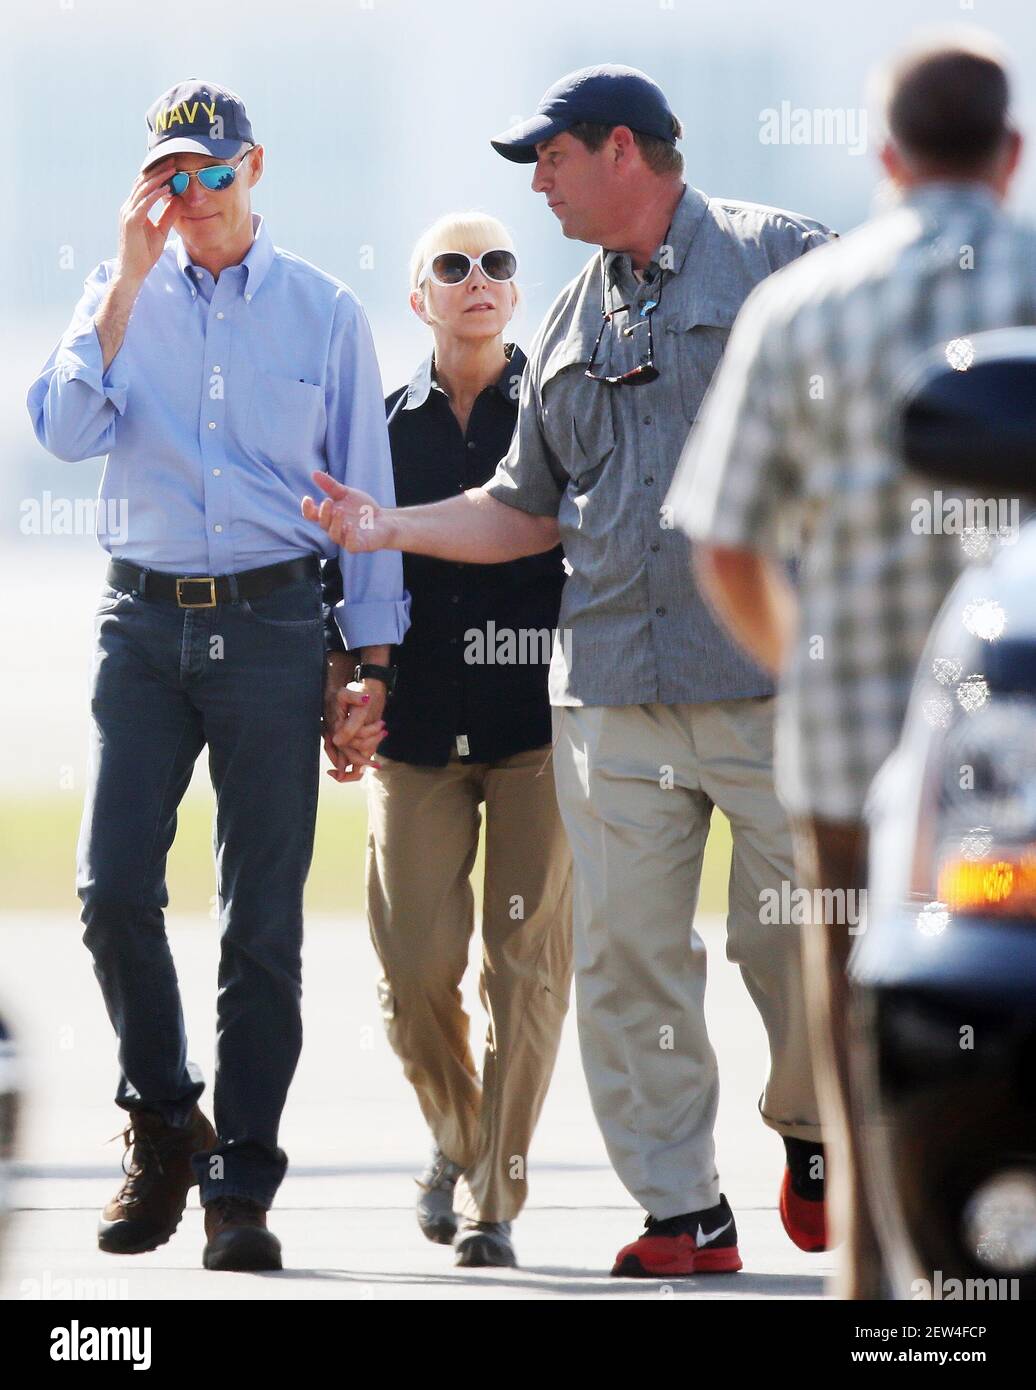 Sep 14, 2017; Fort Myers, FL, USA; Florida governor Rick Scott and his wife Ann arrive Thursday at Southwest International Airport in Fort Myers to greet President Donald Trump. The President will be visiting areas that were ravaged by Hurricane Irma. Mandatory Credit: Kinfay Moroti/News-Press via USA TODAY NETWORK Stock Photo